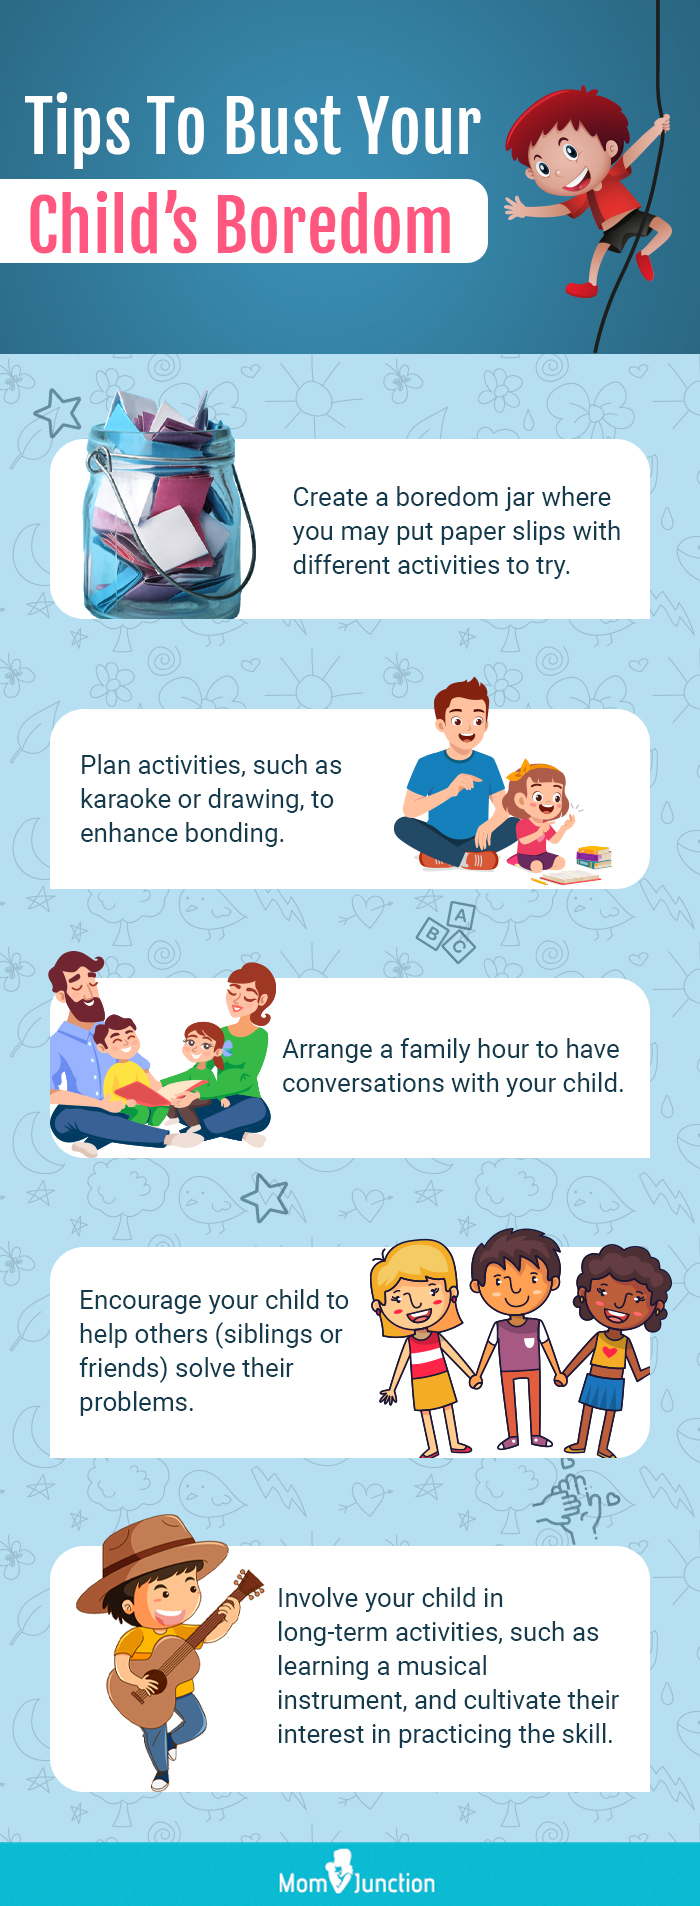 tips to bustyour childs boredom in a smart way [infographic]